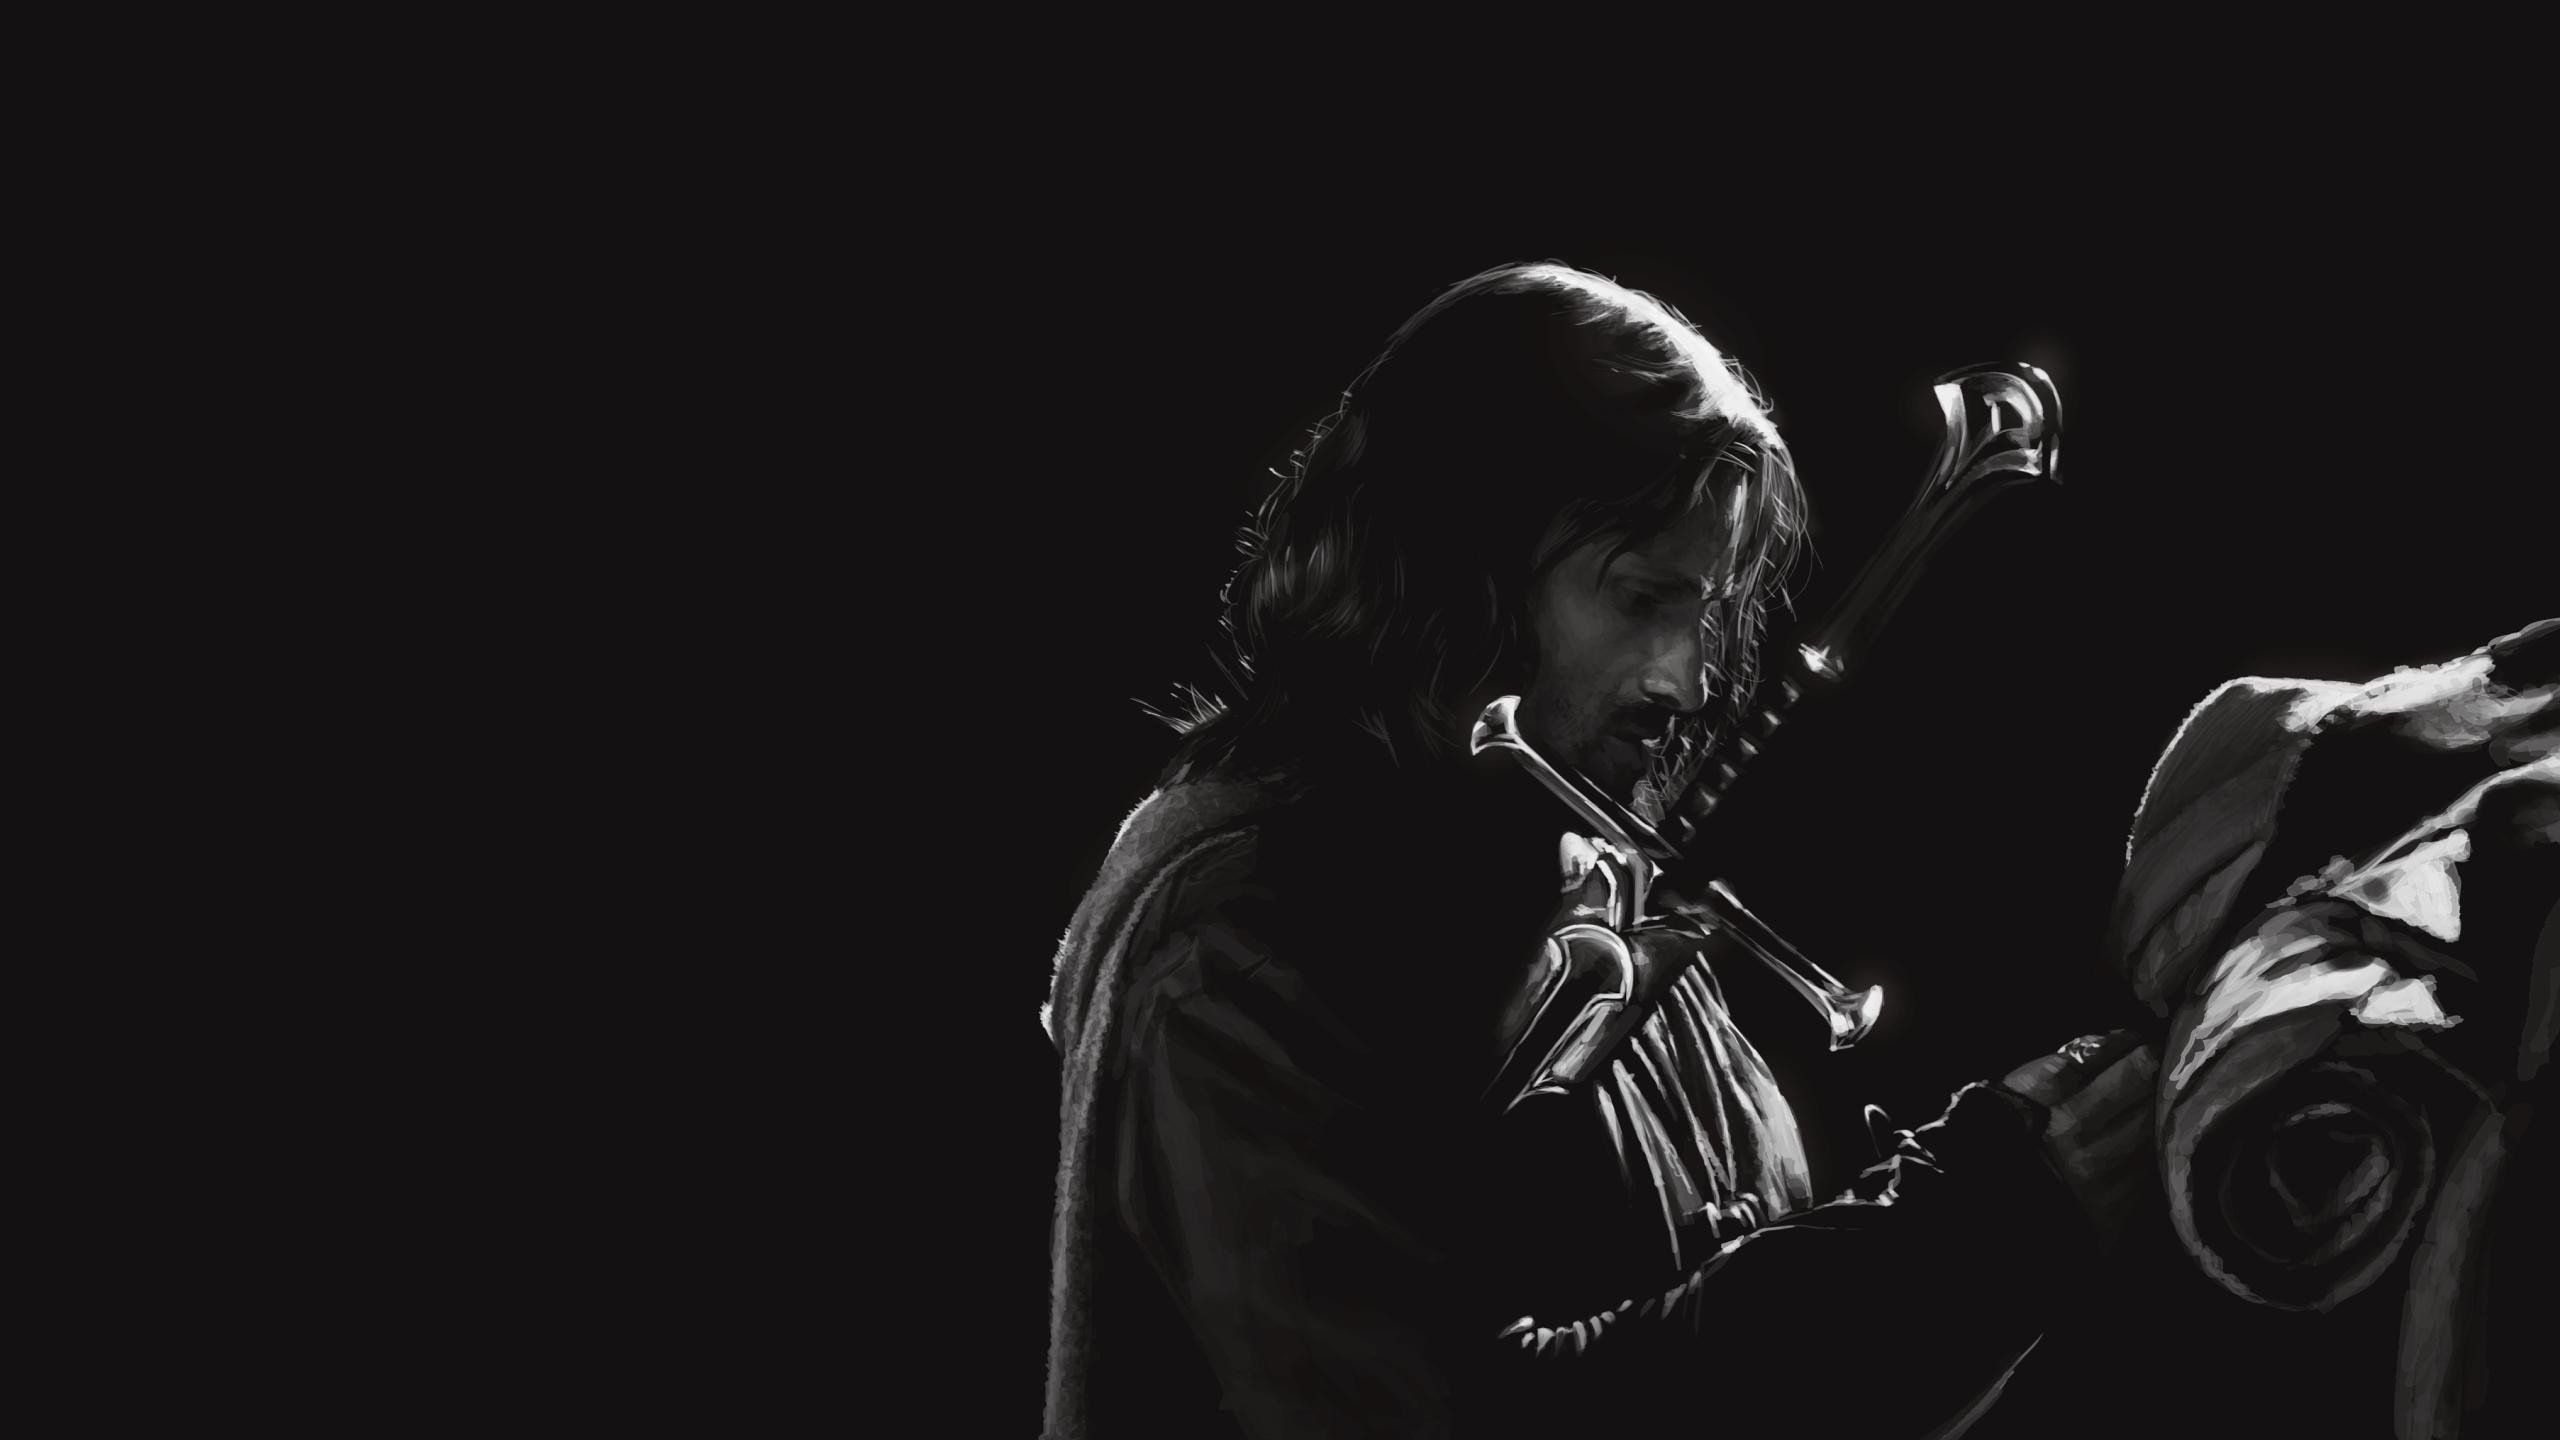 Best Aragorn Wallpaper Hd of the decade Don t miss out 